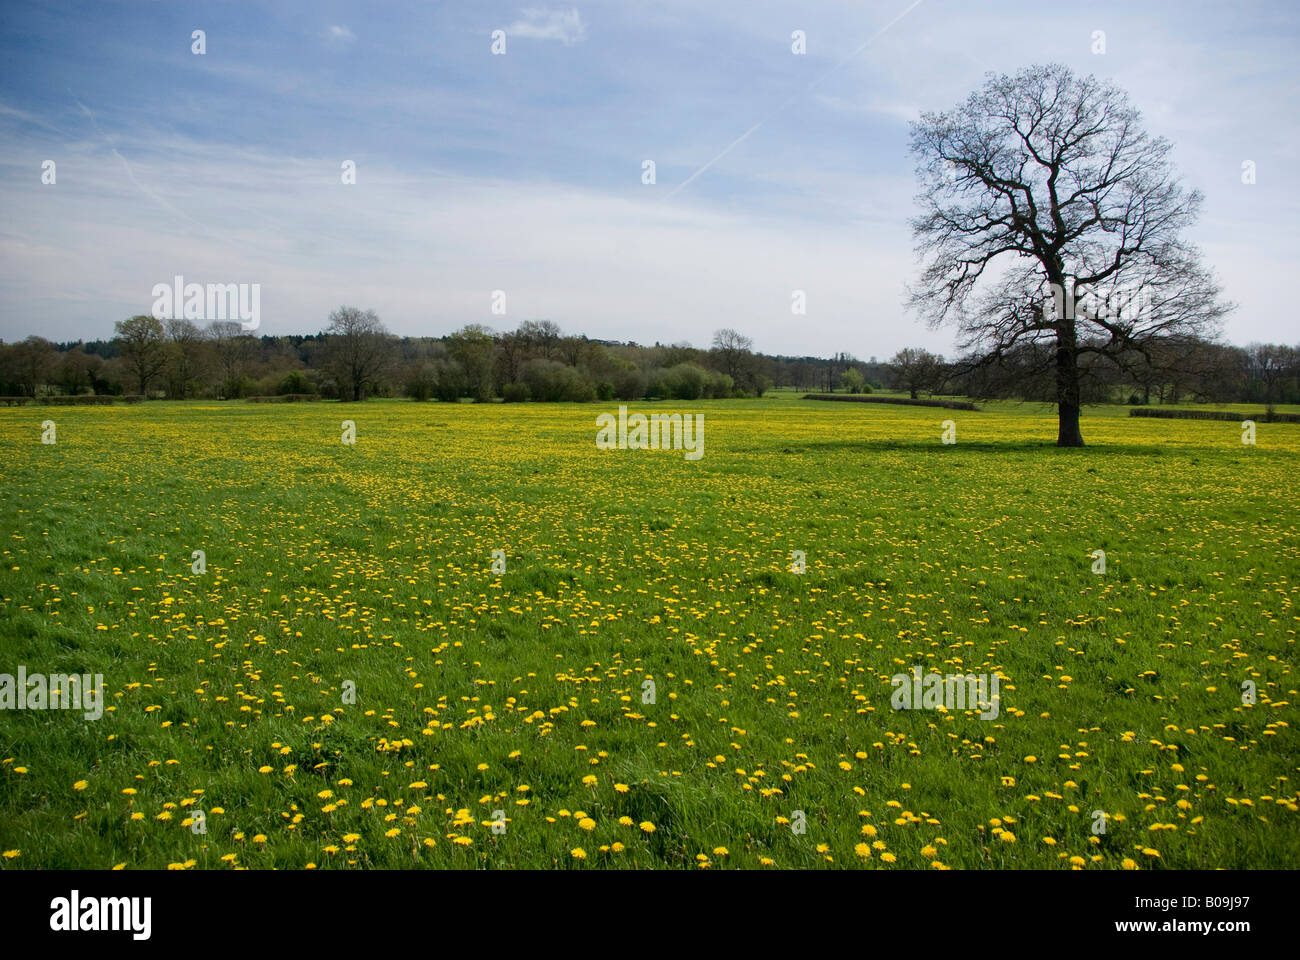 A field of dandelions in south-east England Stock Photo